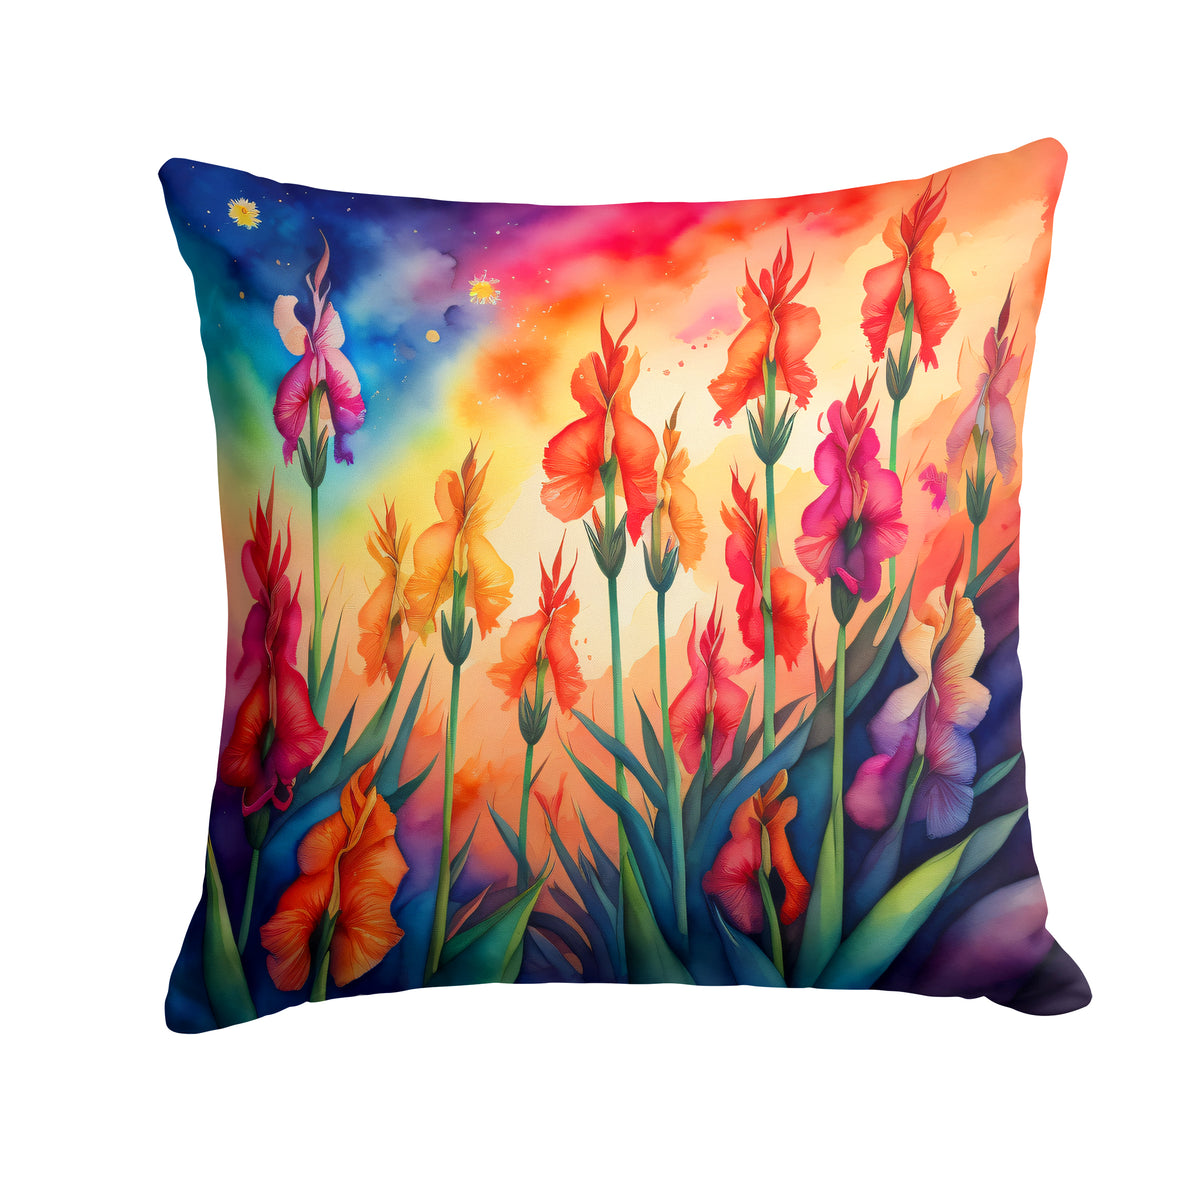 Buy this Colorful Gladiolus Fabric Decorative Pillow